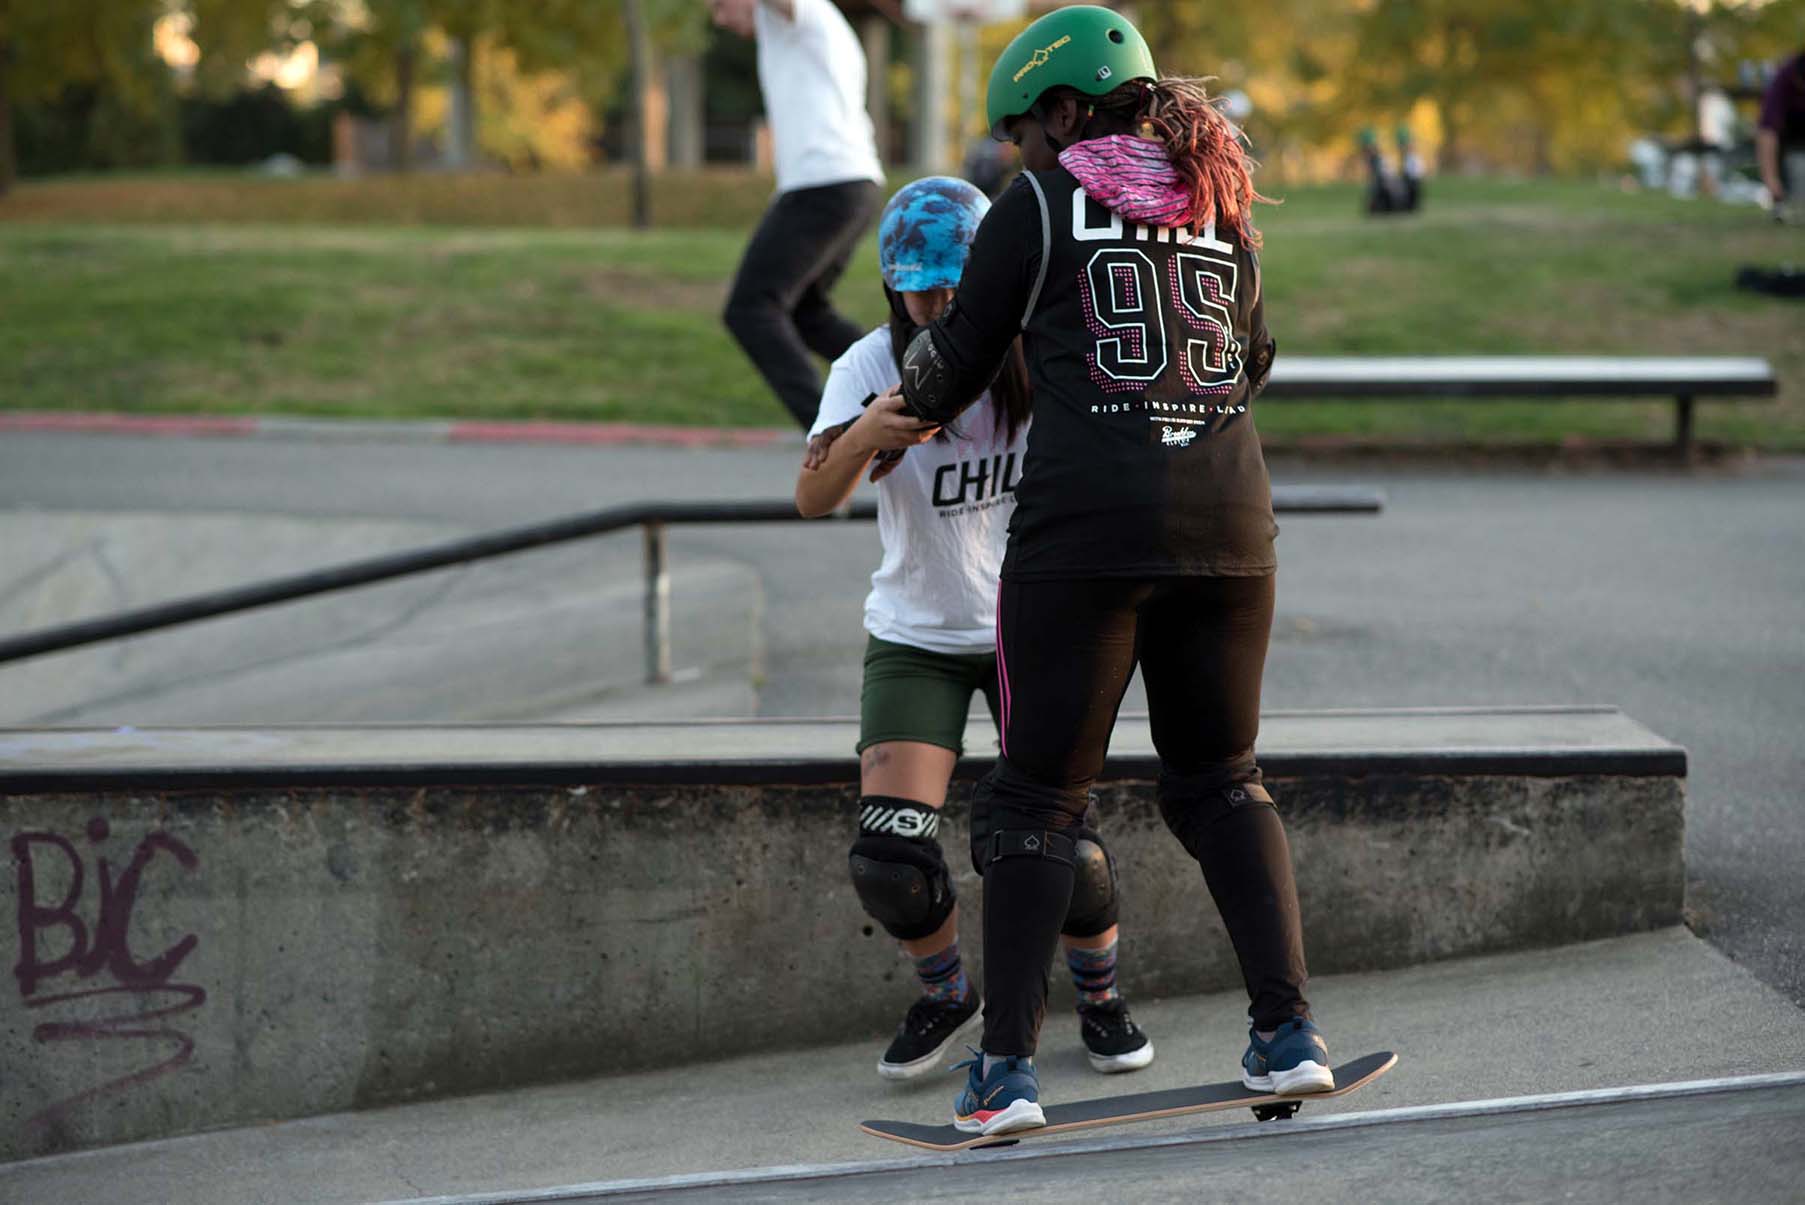 Chill mentor helping a youth on their skateboard.